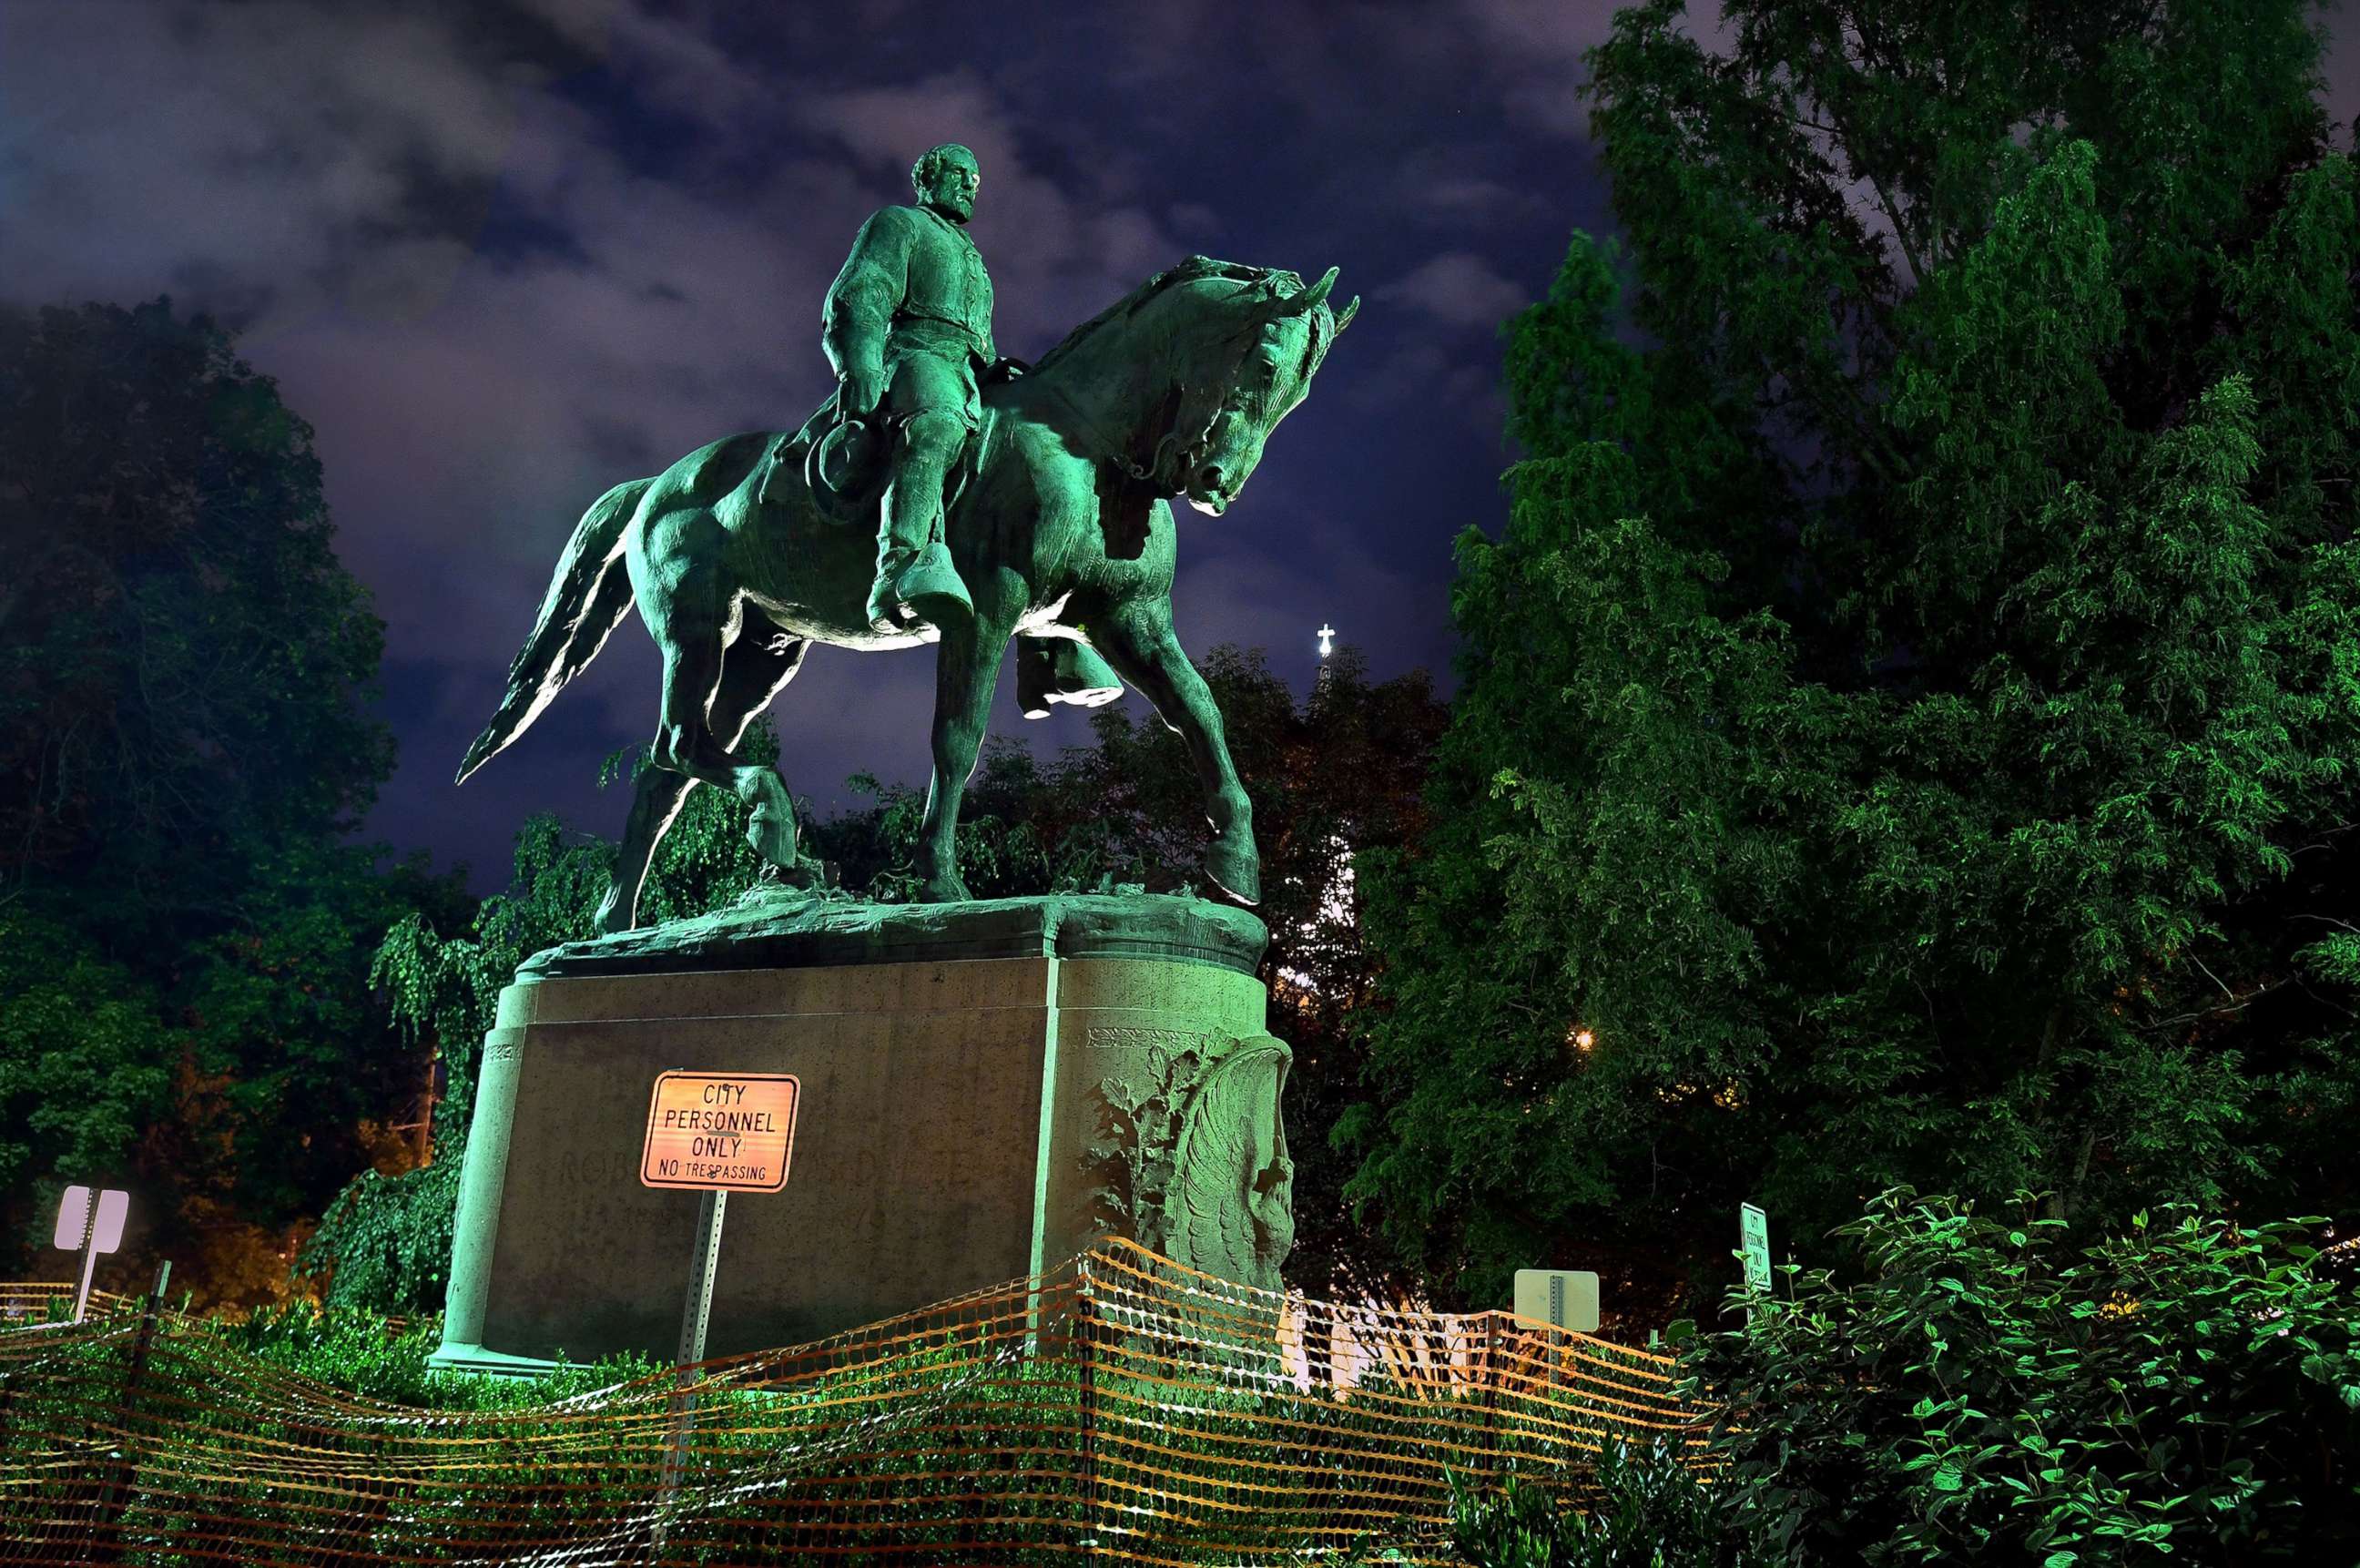 PHOTO: A statue of Robert E. Lee stands in Emancipation Park in Charlottesville, Va., July 7, 2018.